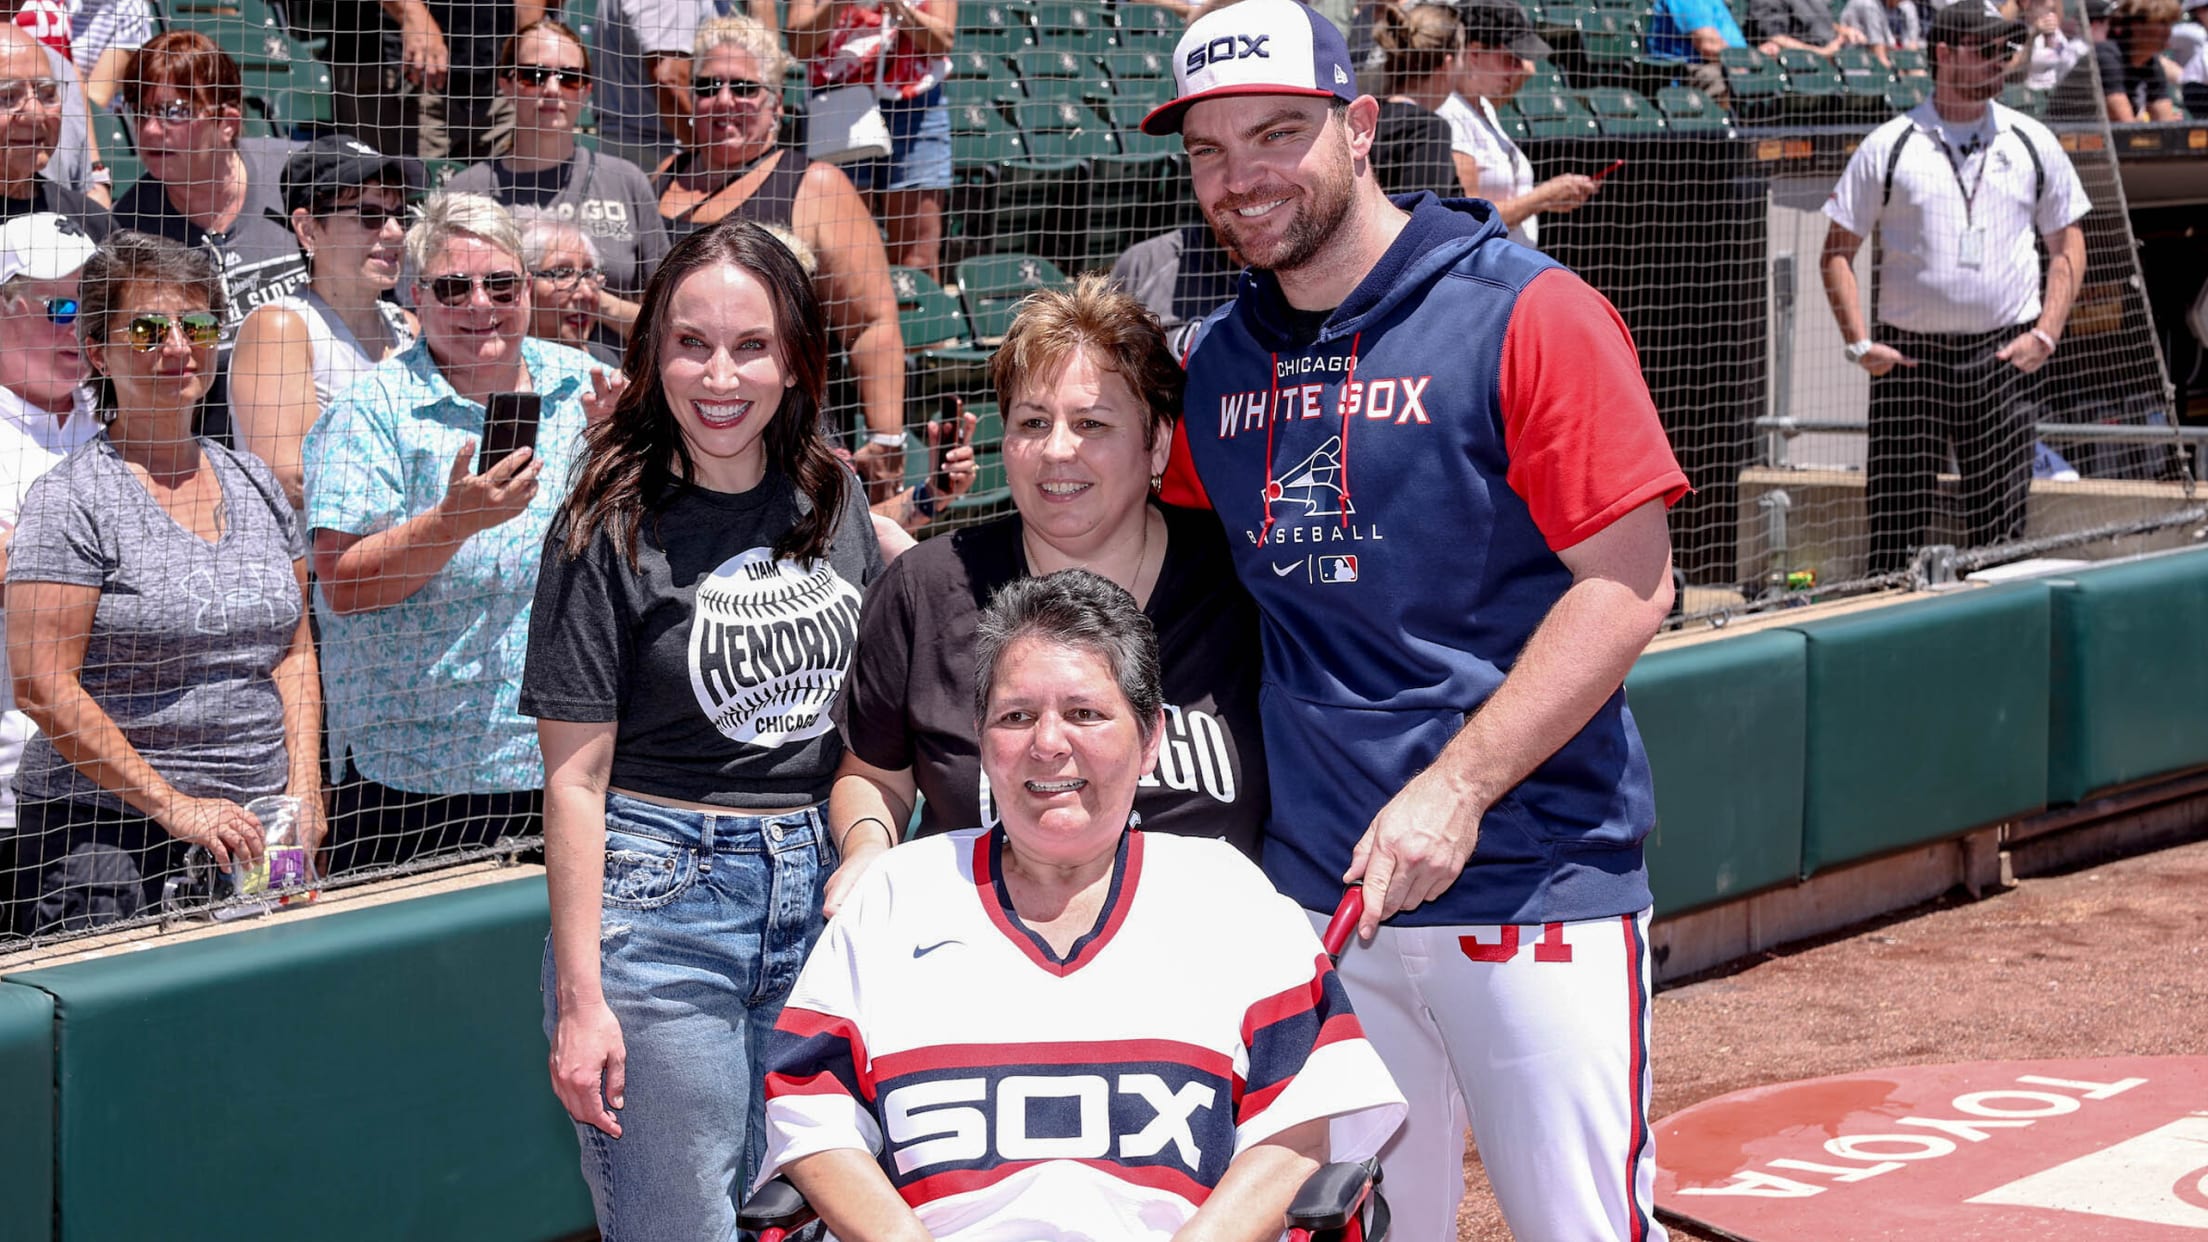 Official Hendriks Close Out Cancer Shirt Chicago White Sox Charities -  Sgatee